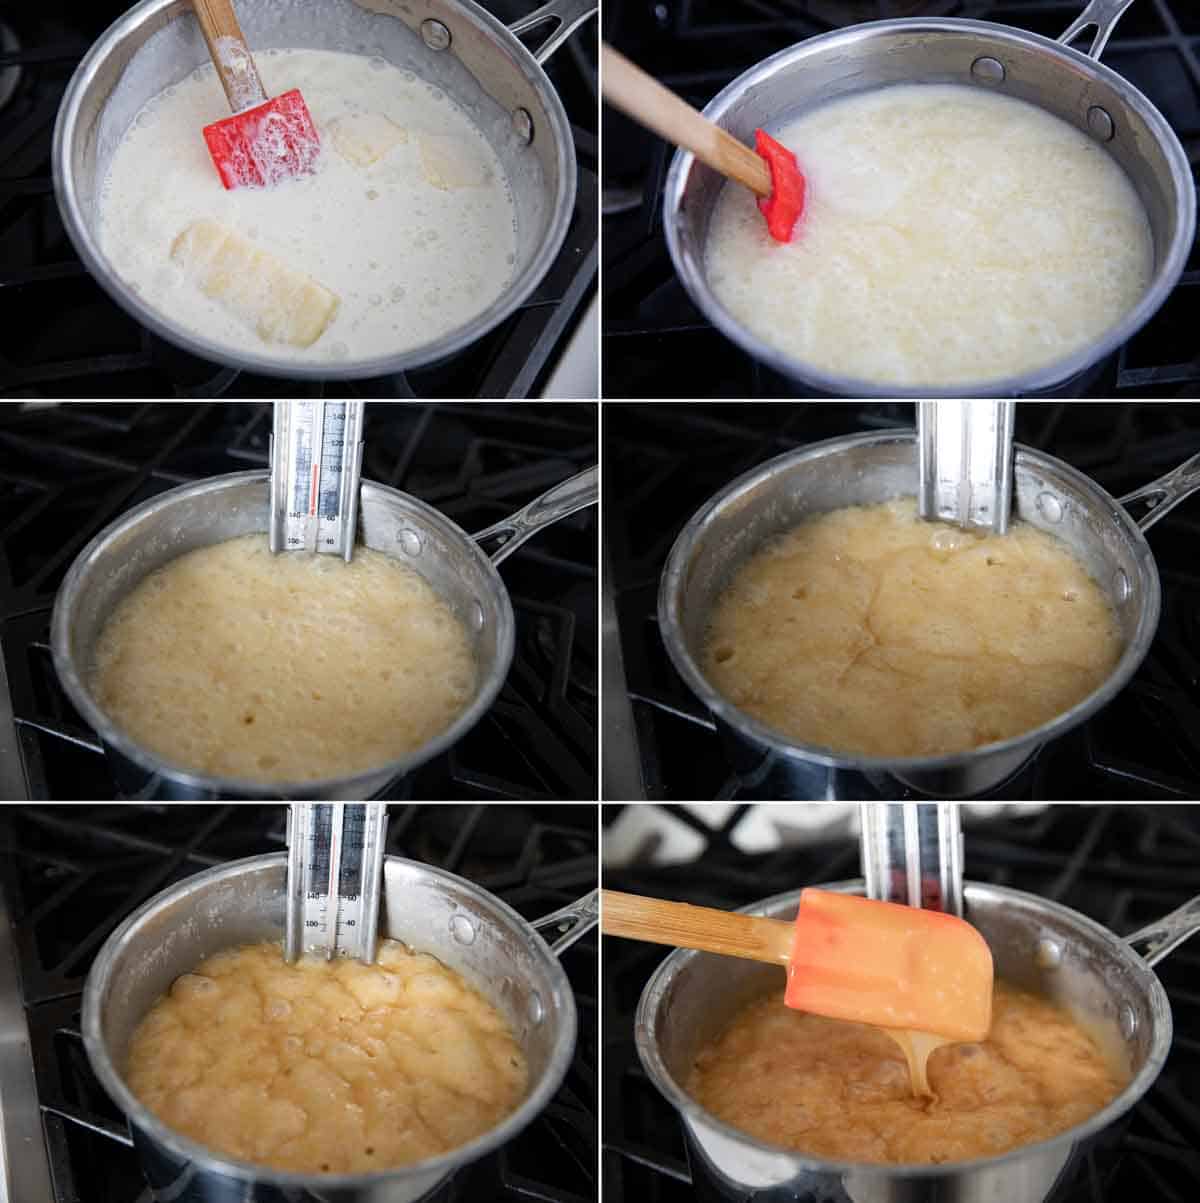 Steps to make caramel candy at home